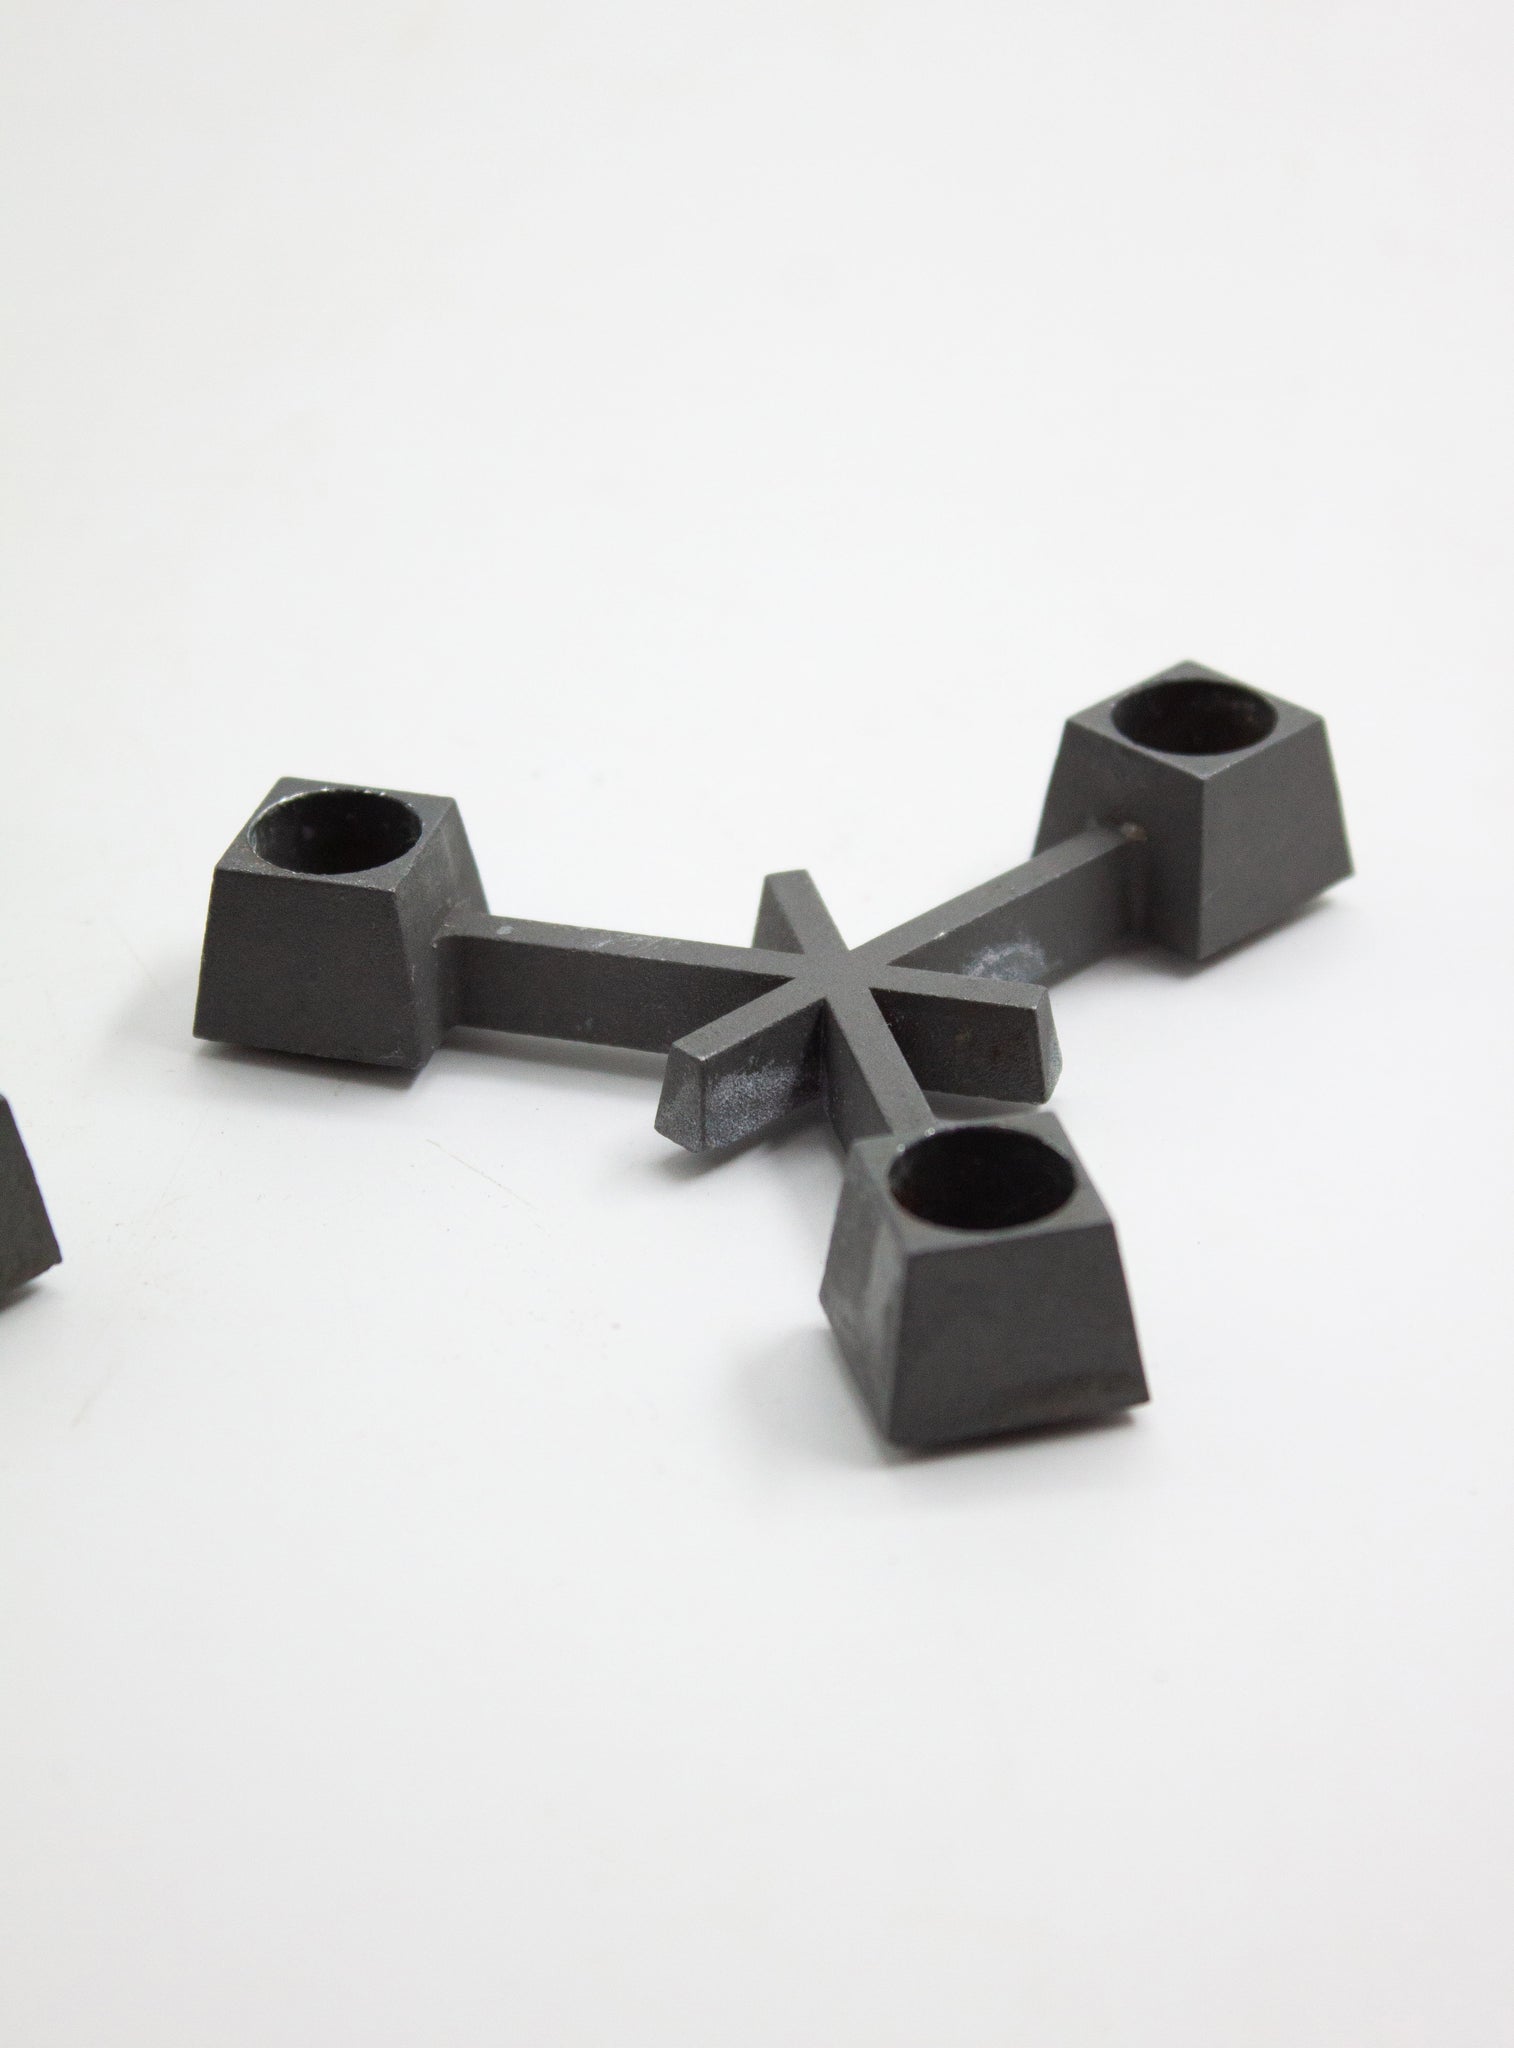 Paro Mini Candle Holders by Jens Quistgaard